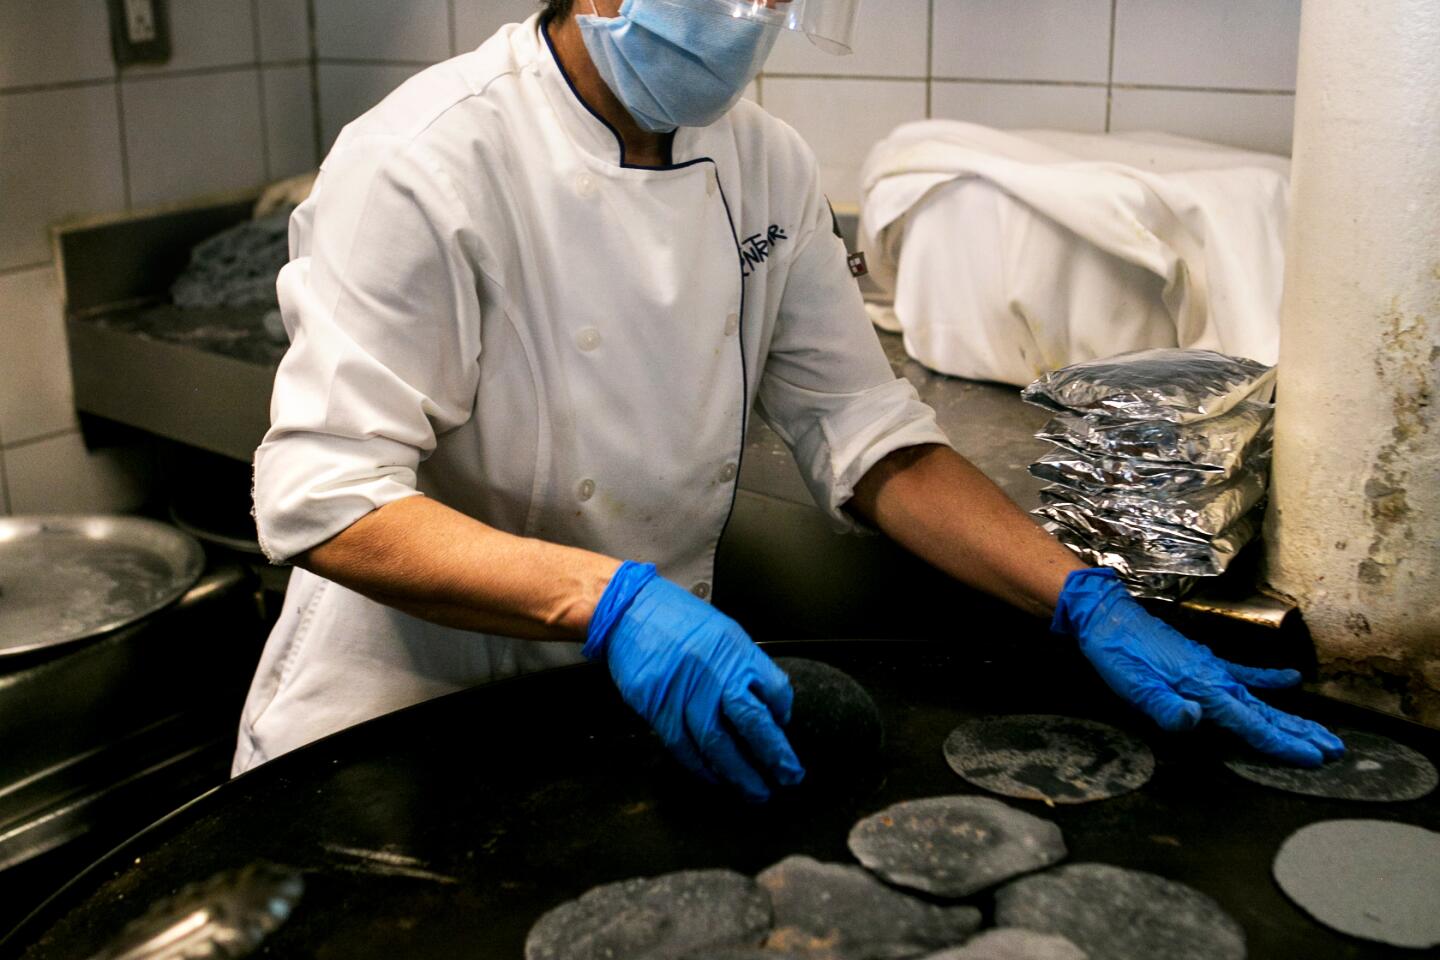 Lupita Ortiz Morelos, a cook at the popular seafood restaurant Contramar in Mexico City, makes tostadas on a comal.